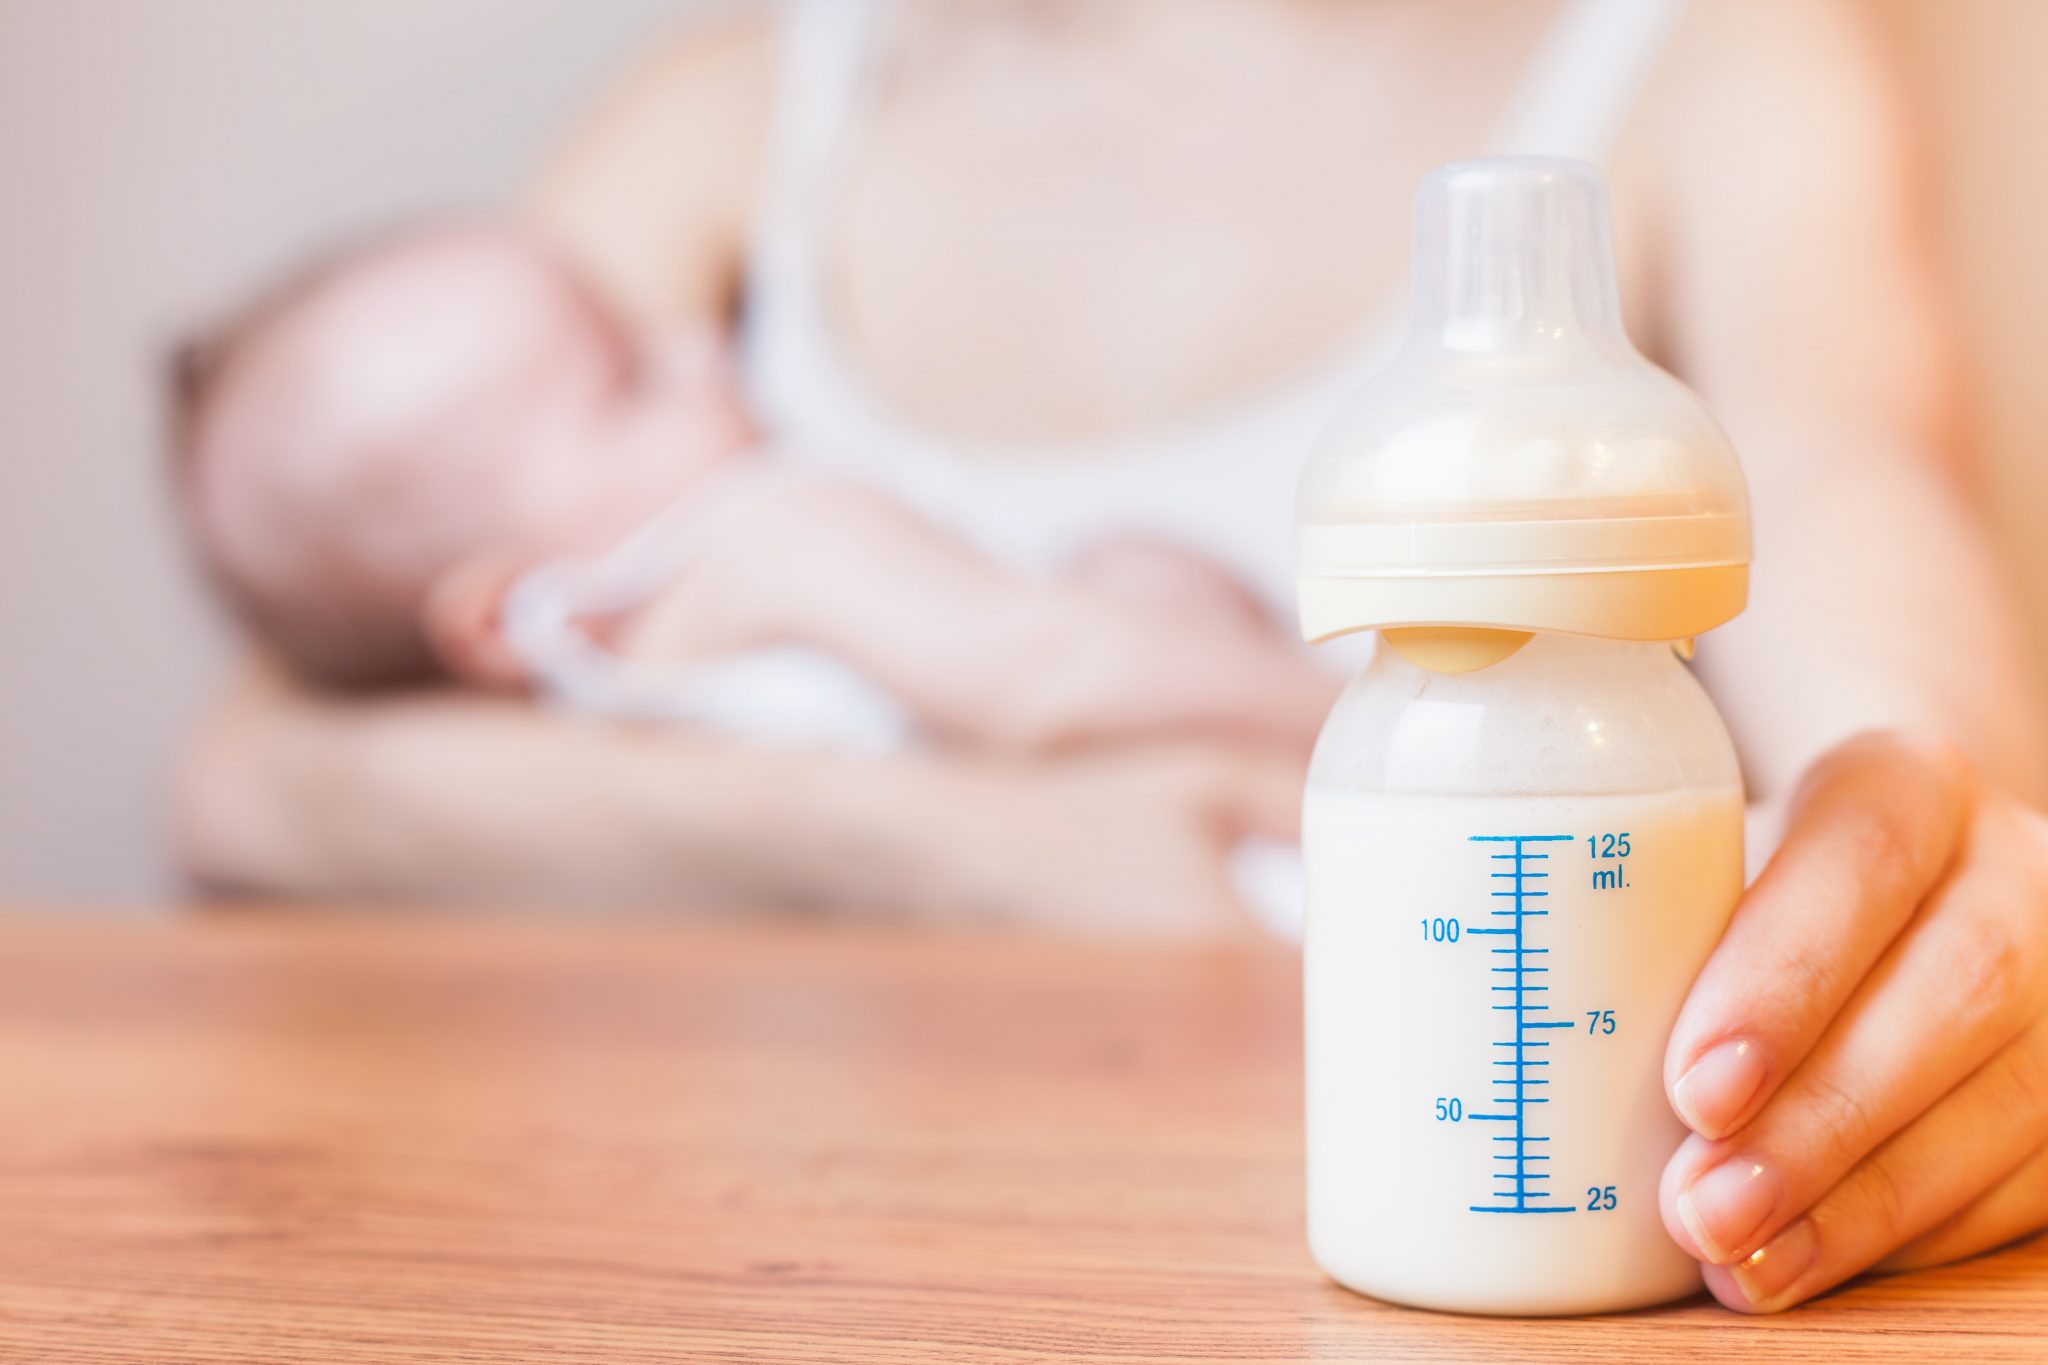 Mother breastfeed ing baby with bottle in the foreground